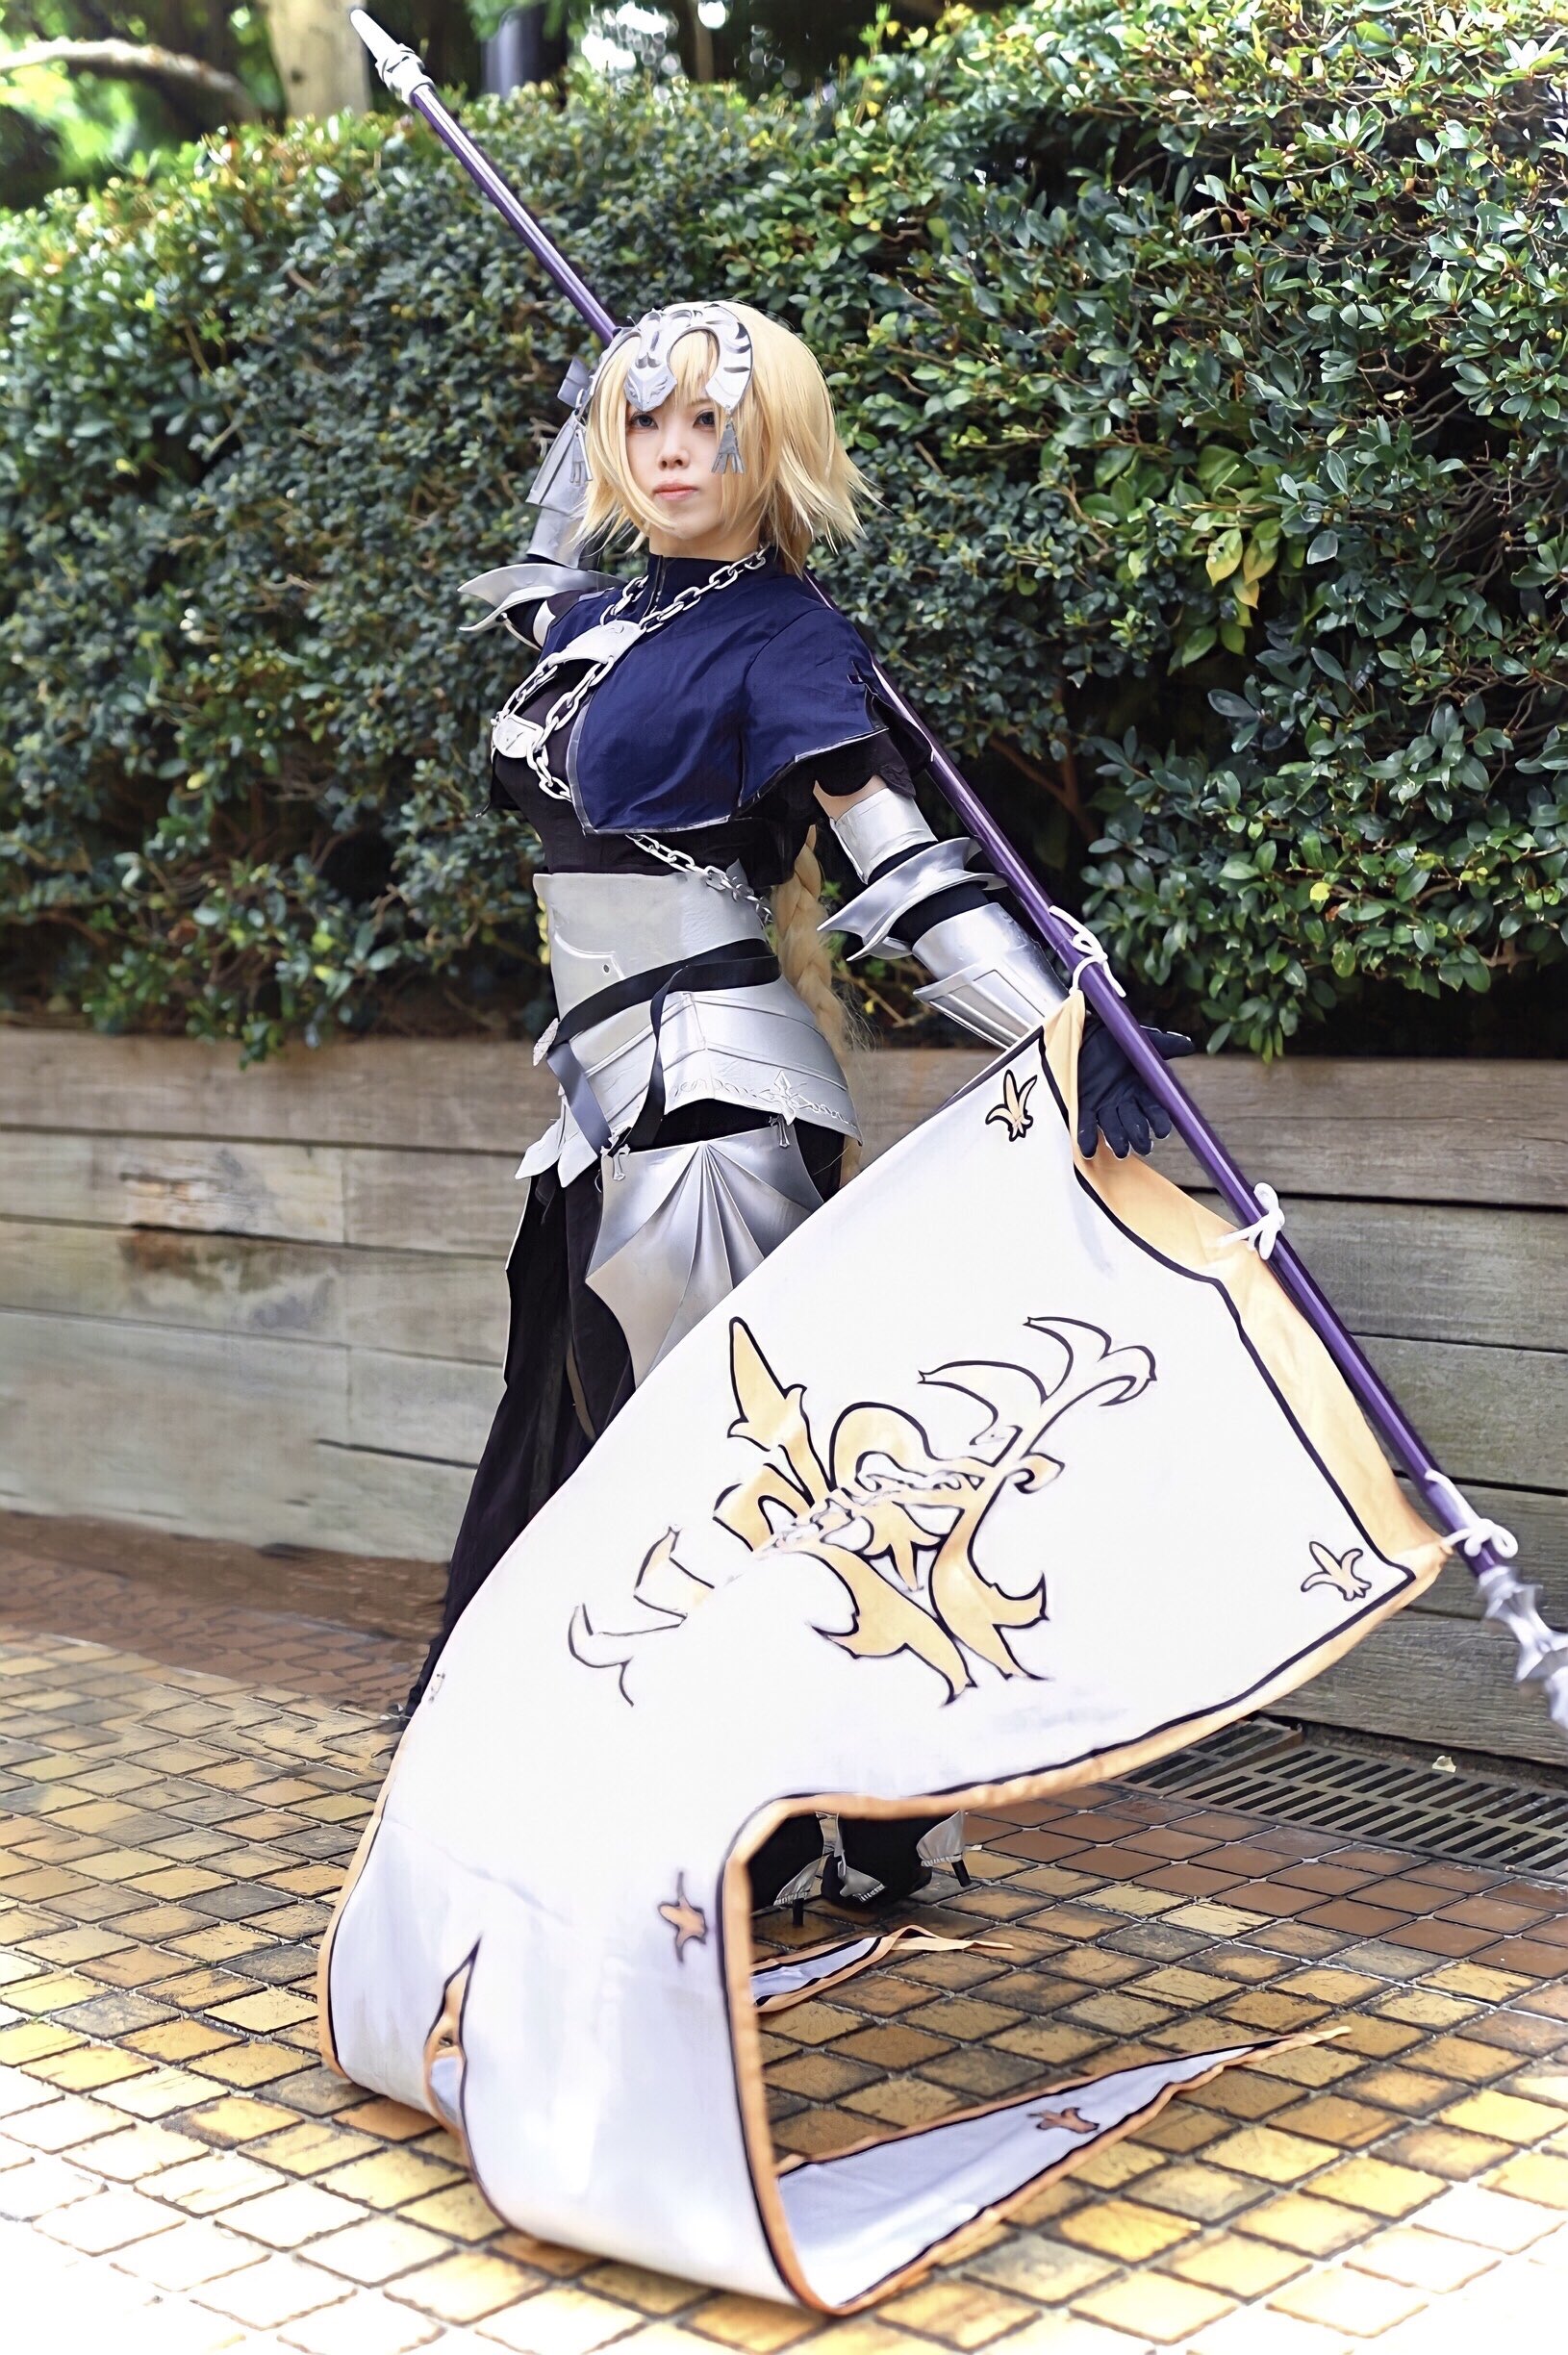 Jeanne DArc Fate Ruler Fate Apocrypha Asian Asian Cosplayer Cosplay Japanese Japanese Women Women Lo 1630x2448